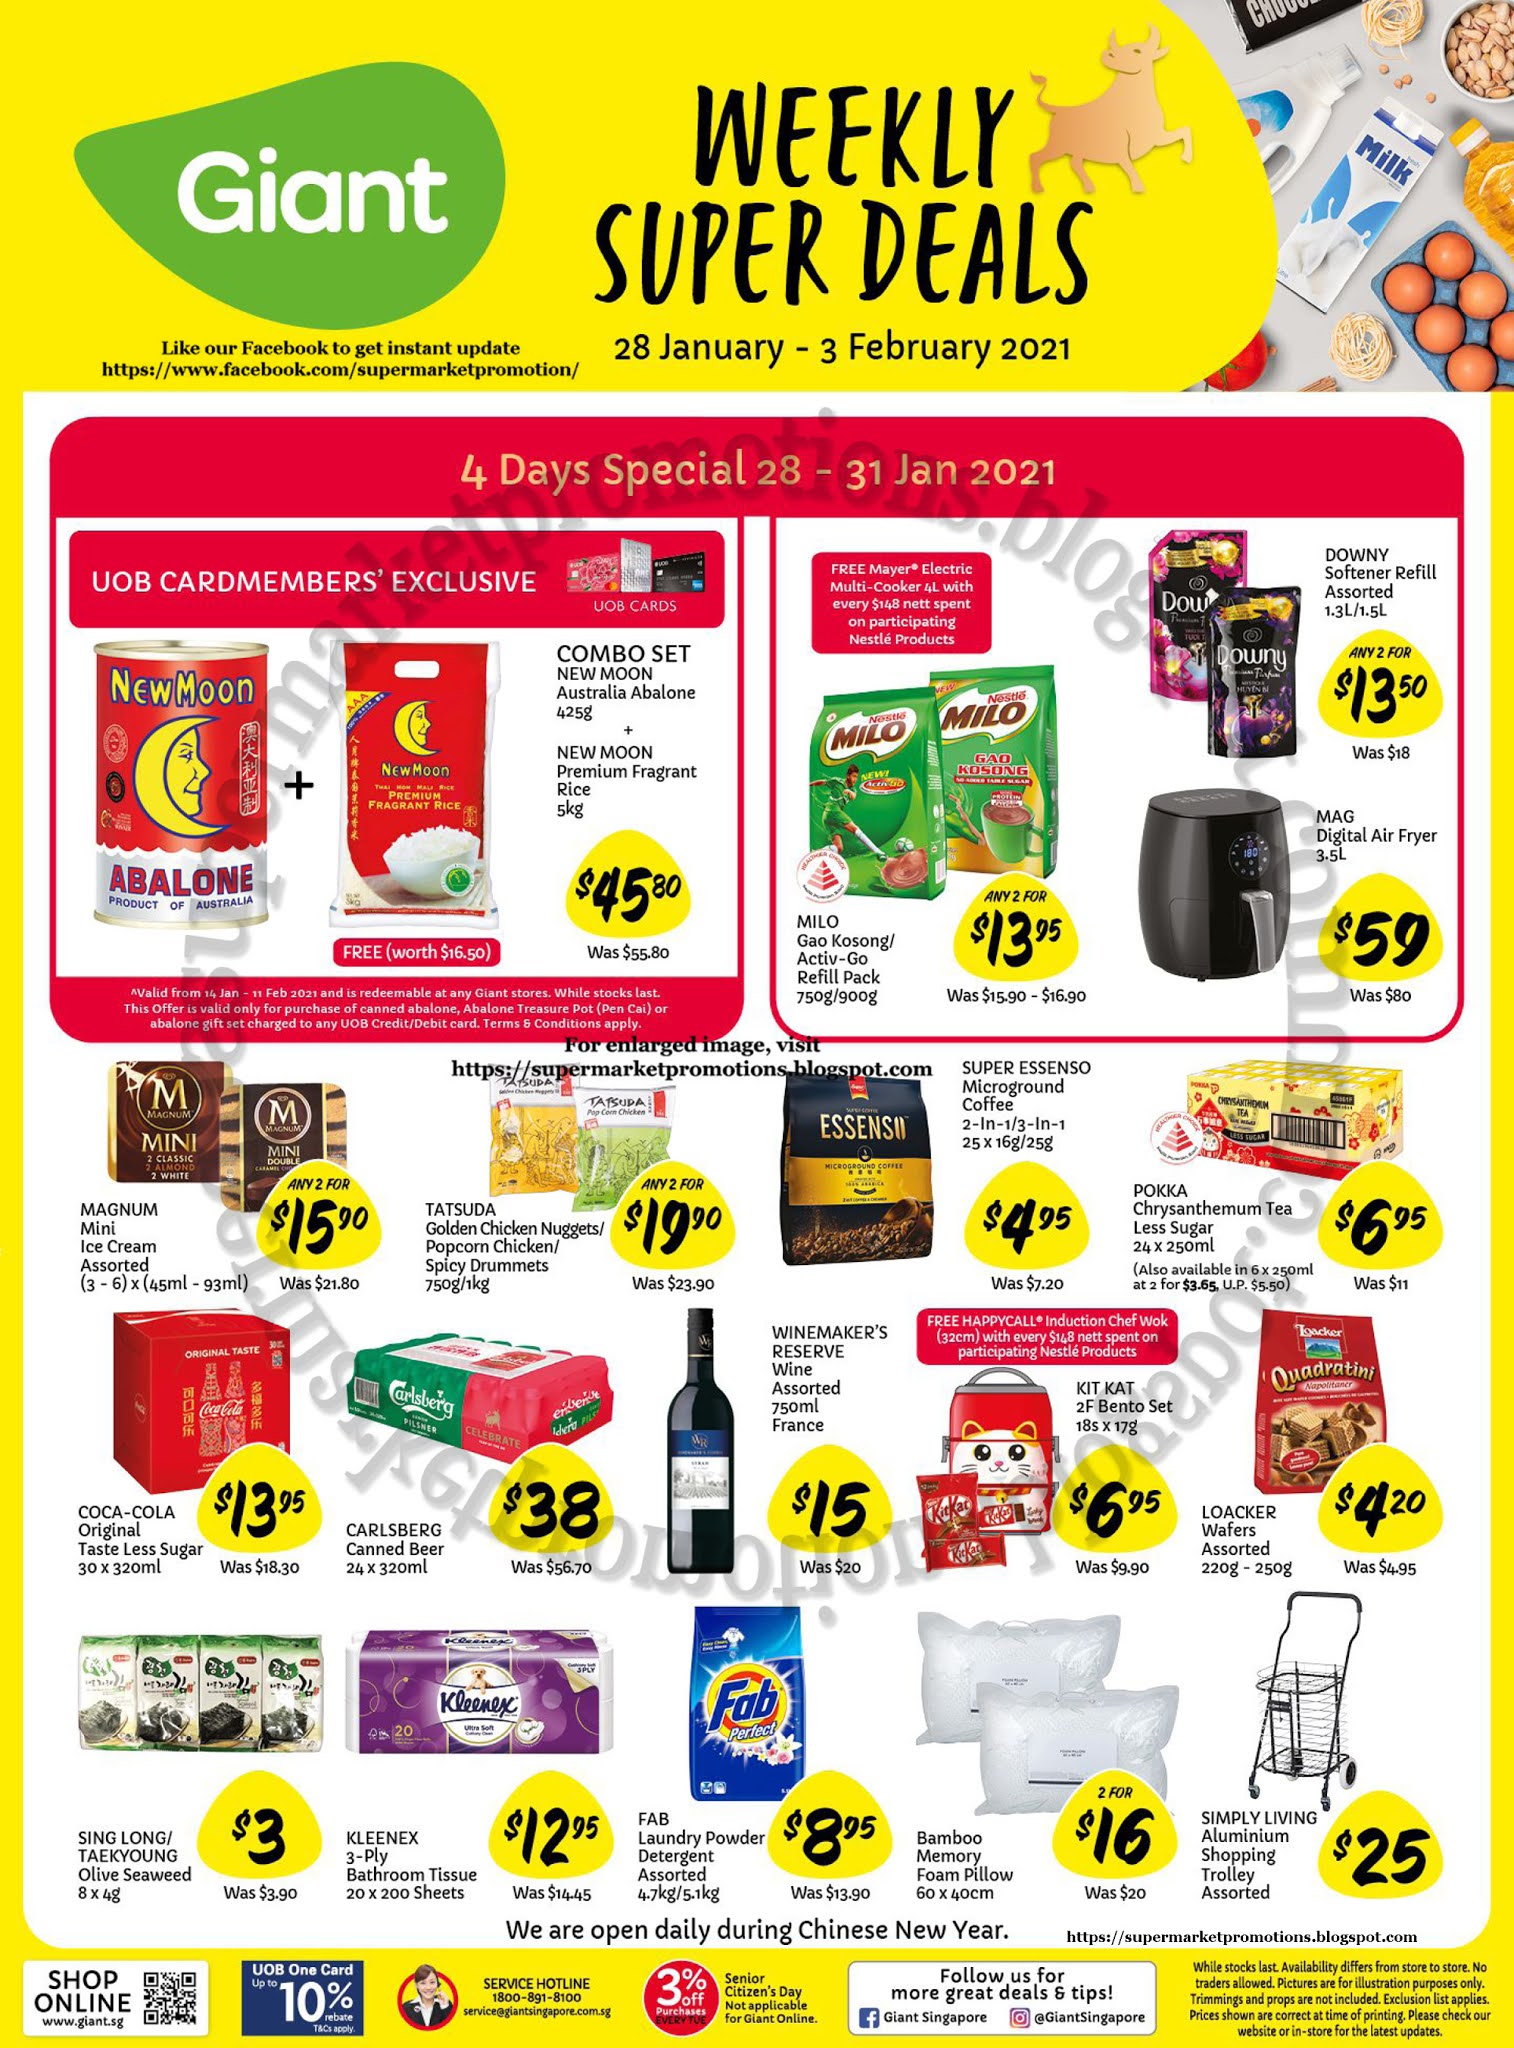  Giant  Weekly  Super Deals Promotion  28 January 03 